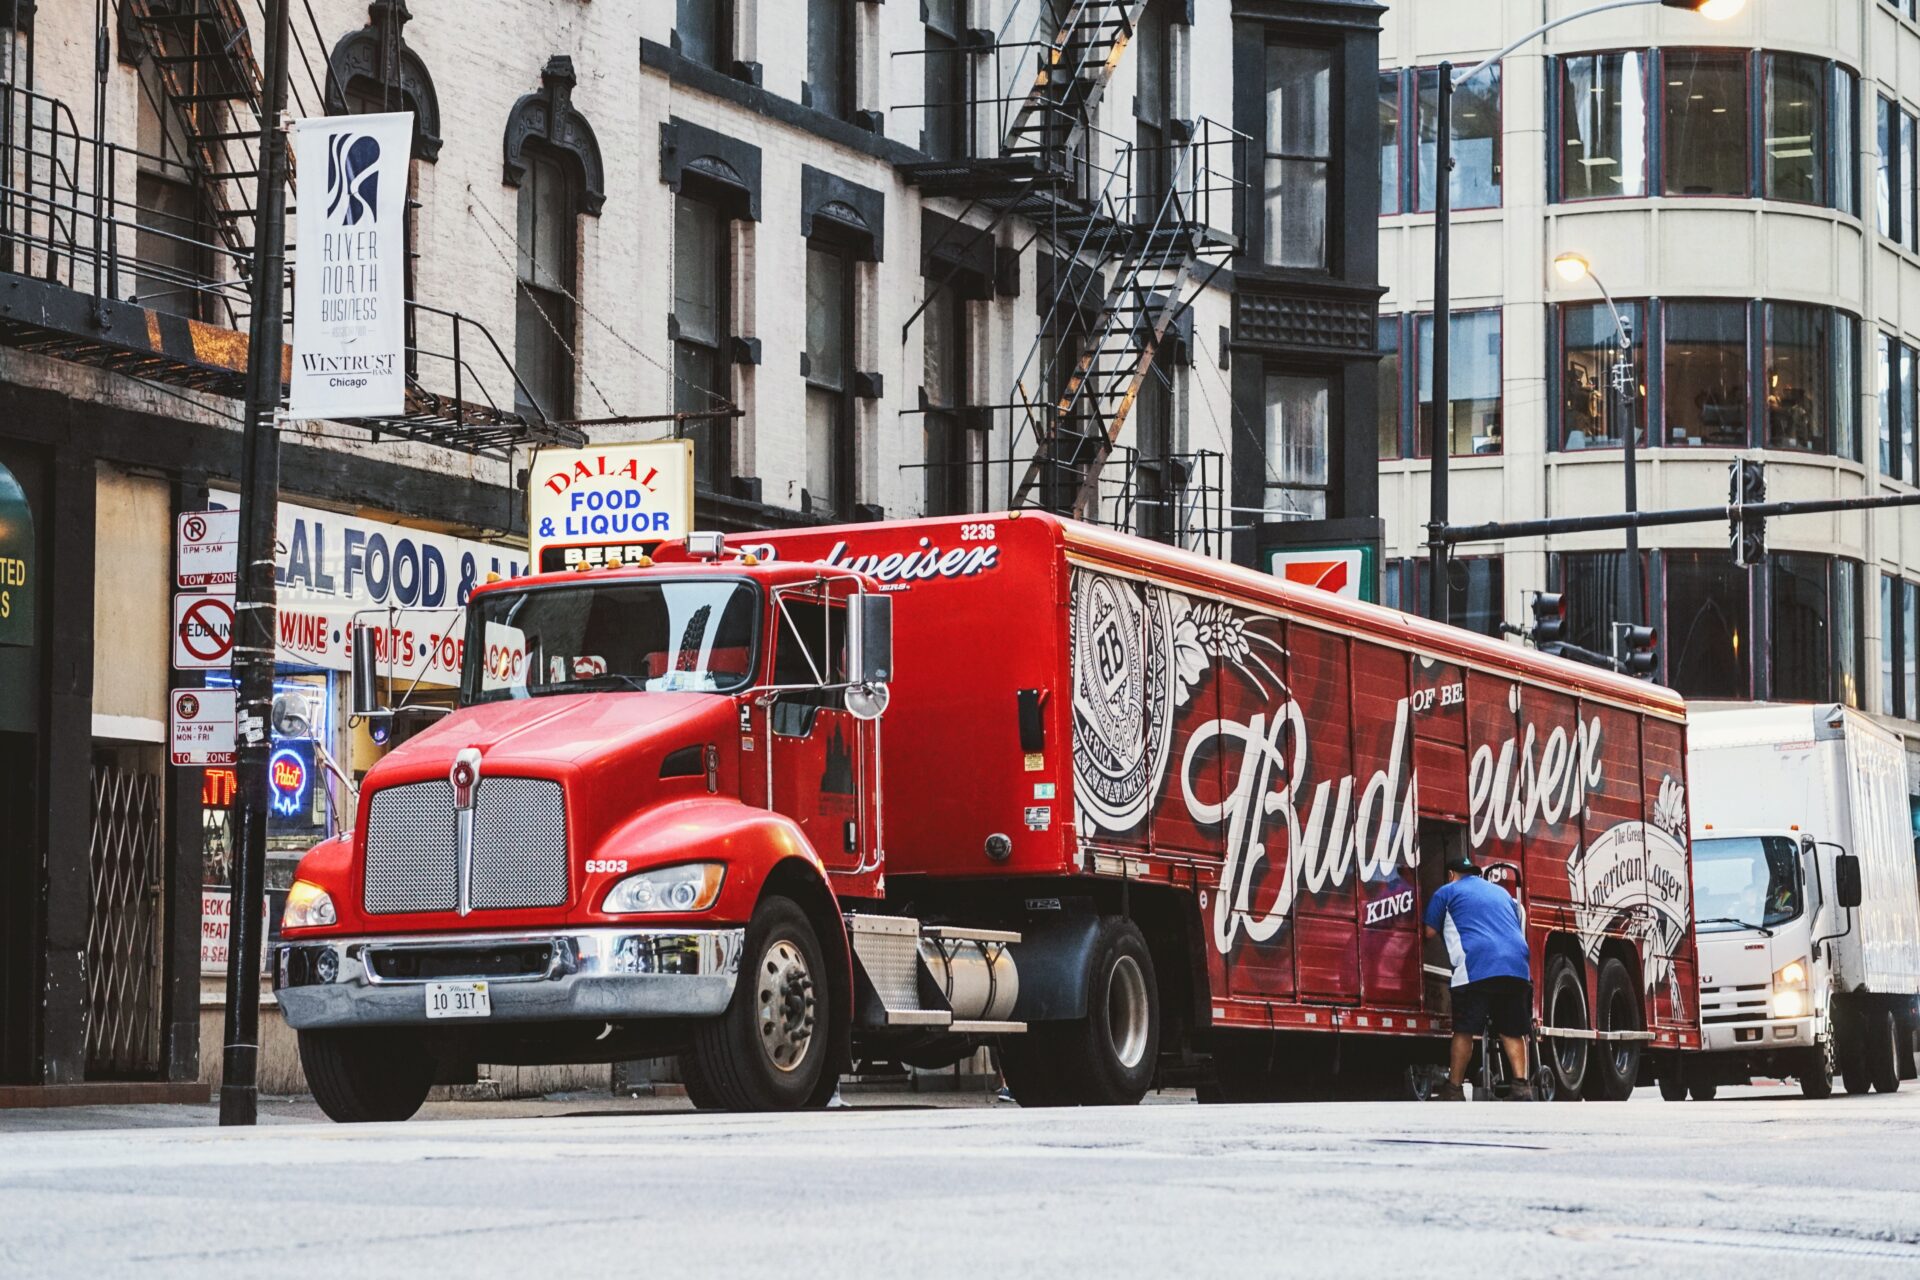 the truck is painted in red with the emblem and the name of the beer: Budweiser beer